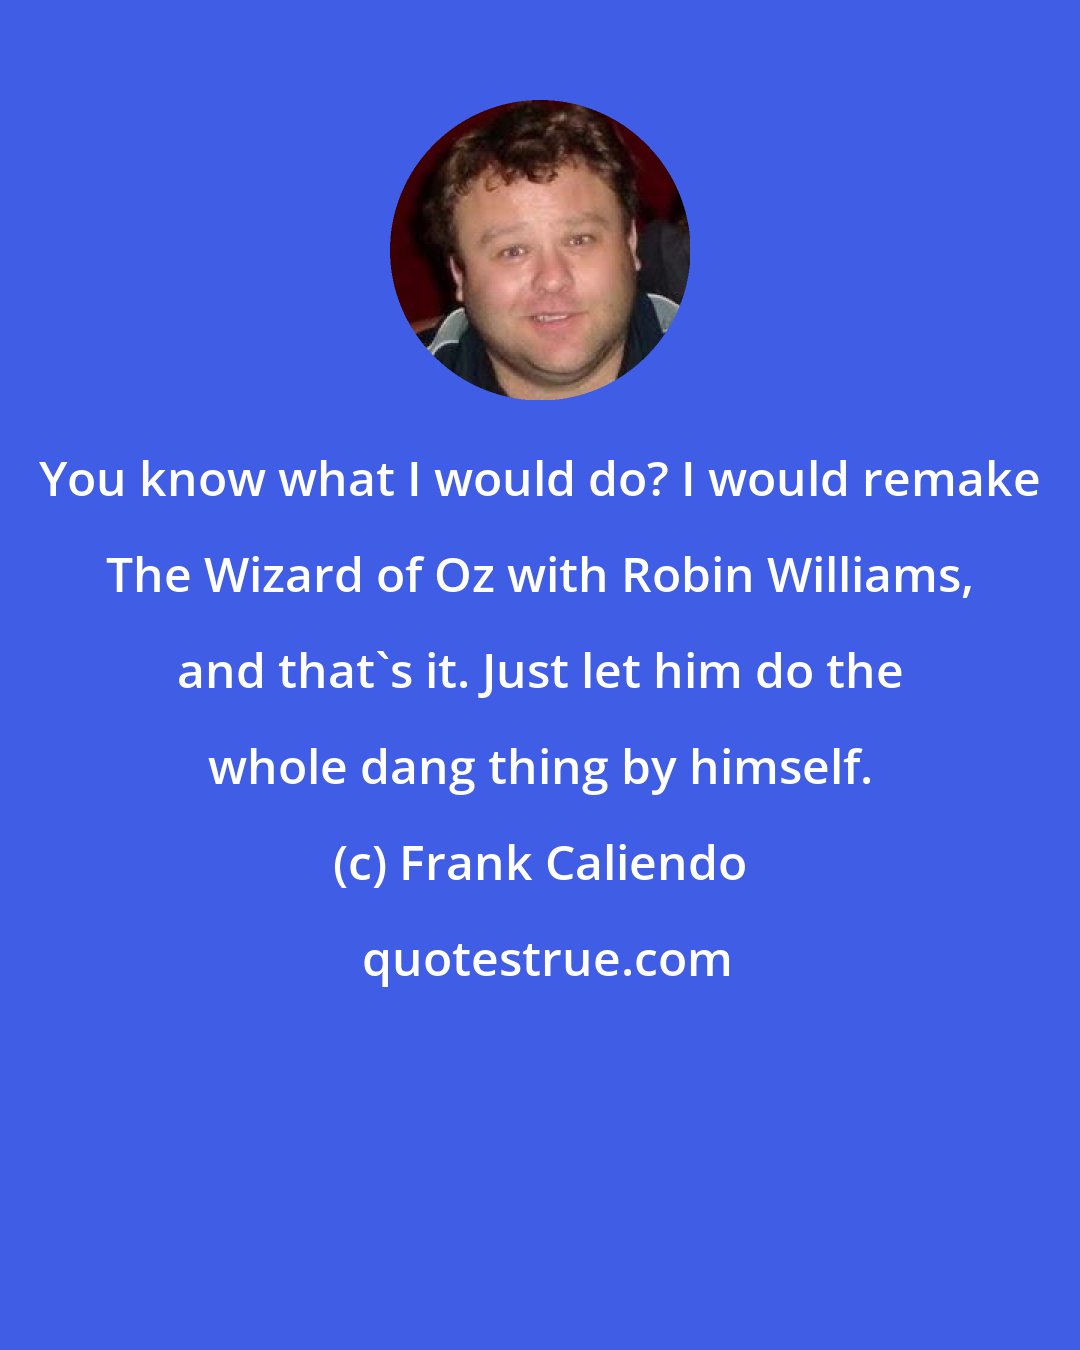 Frank Caliendo: You know what I would do? I would remake The Wizard of Oz with Robin Williams, and that's it. Just let him do the whole dang thing by himself.